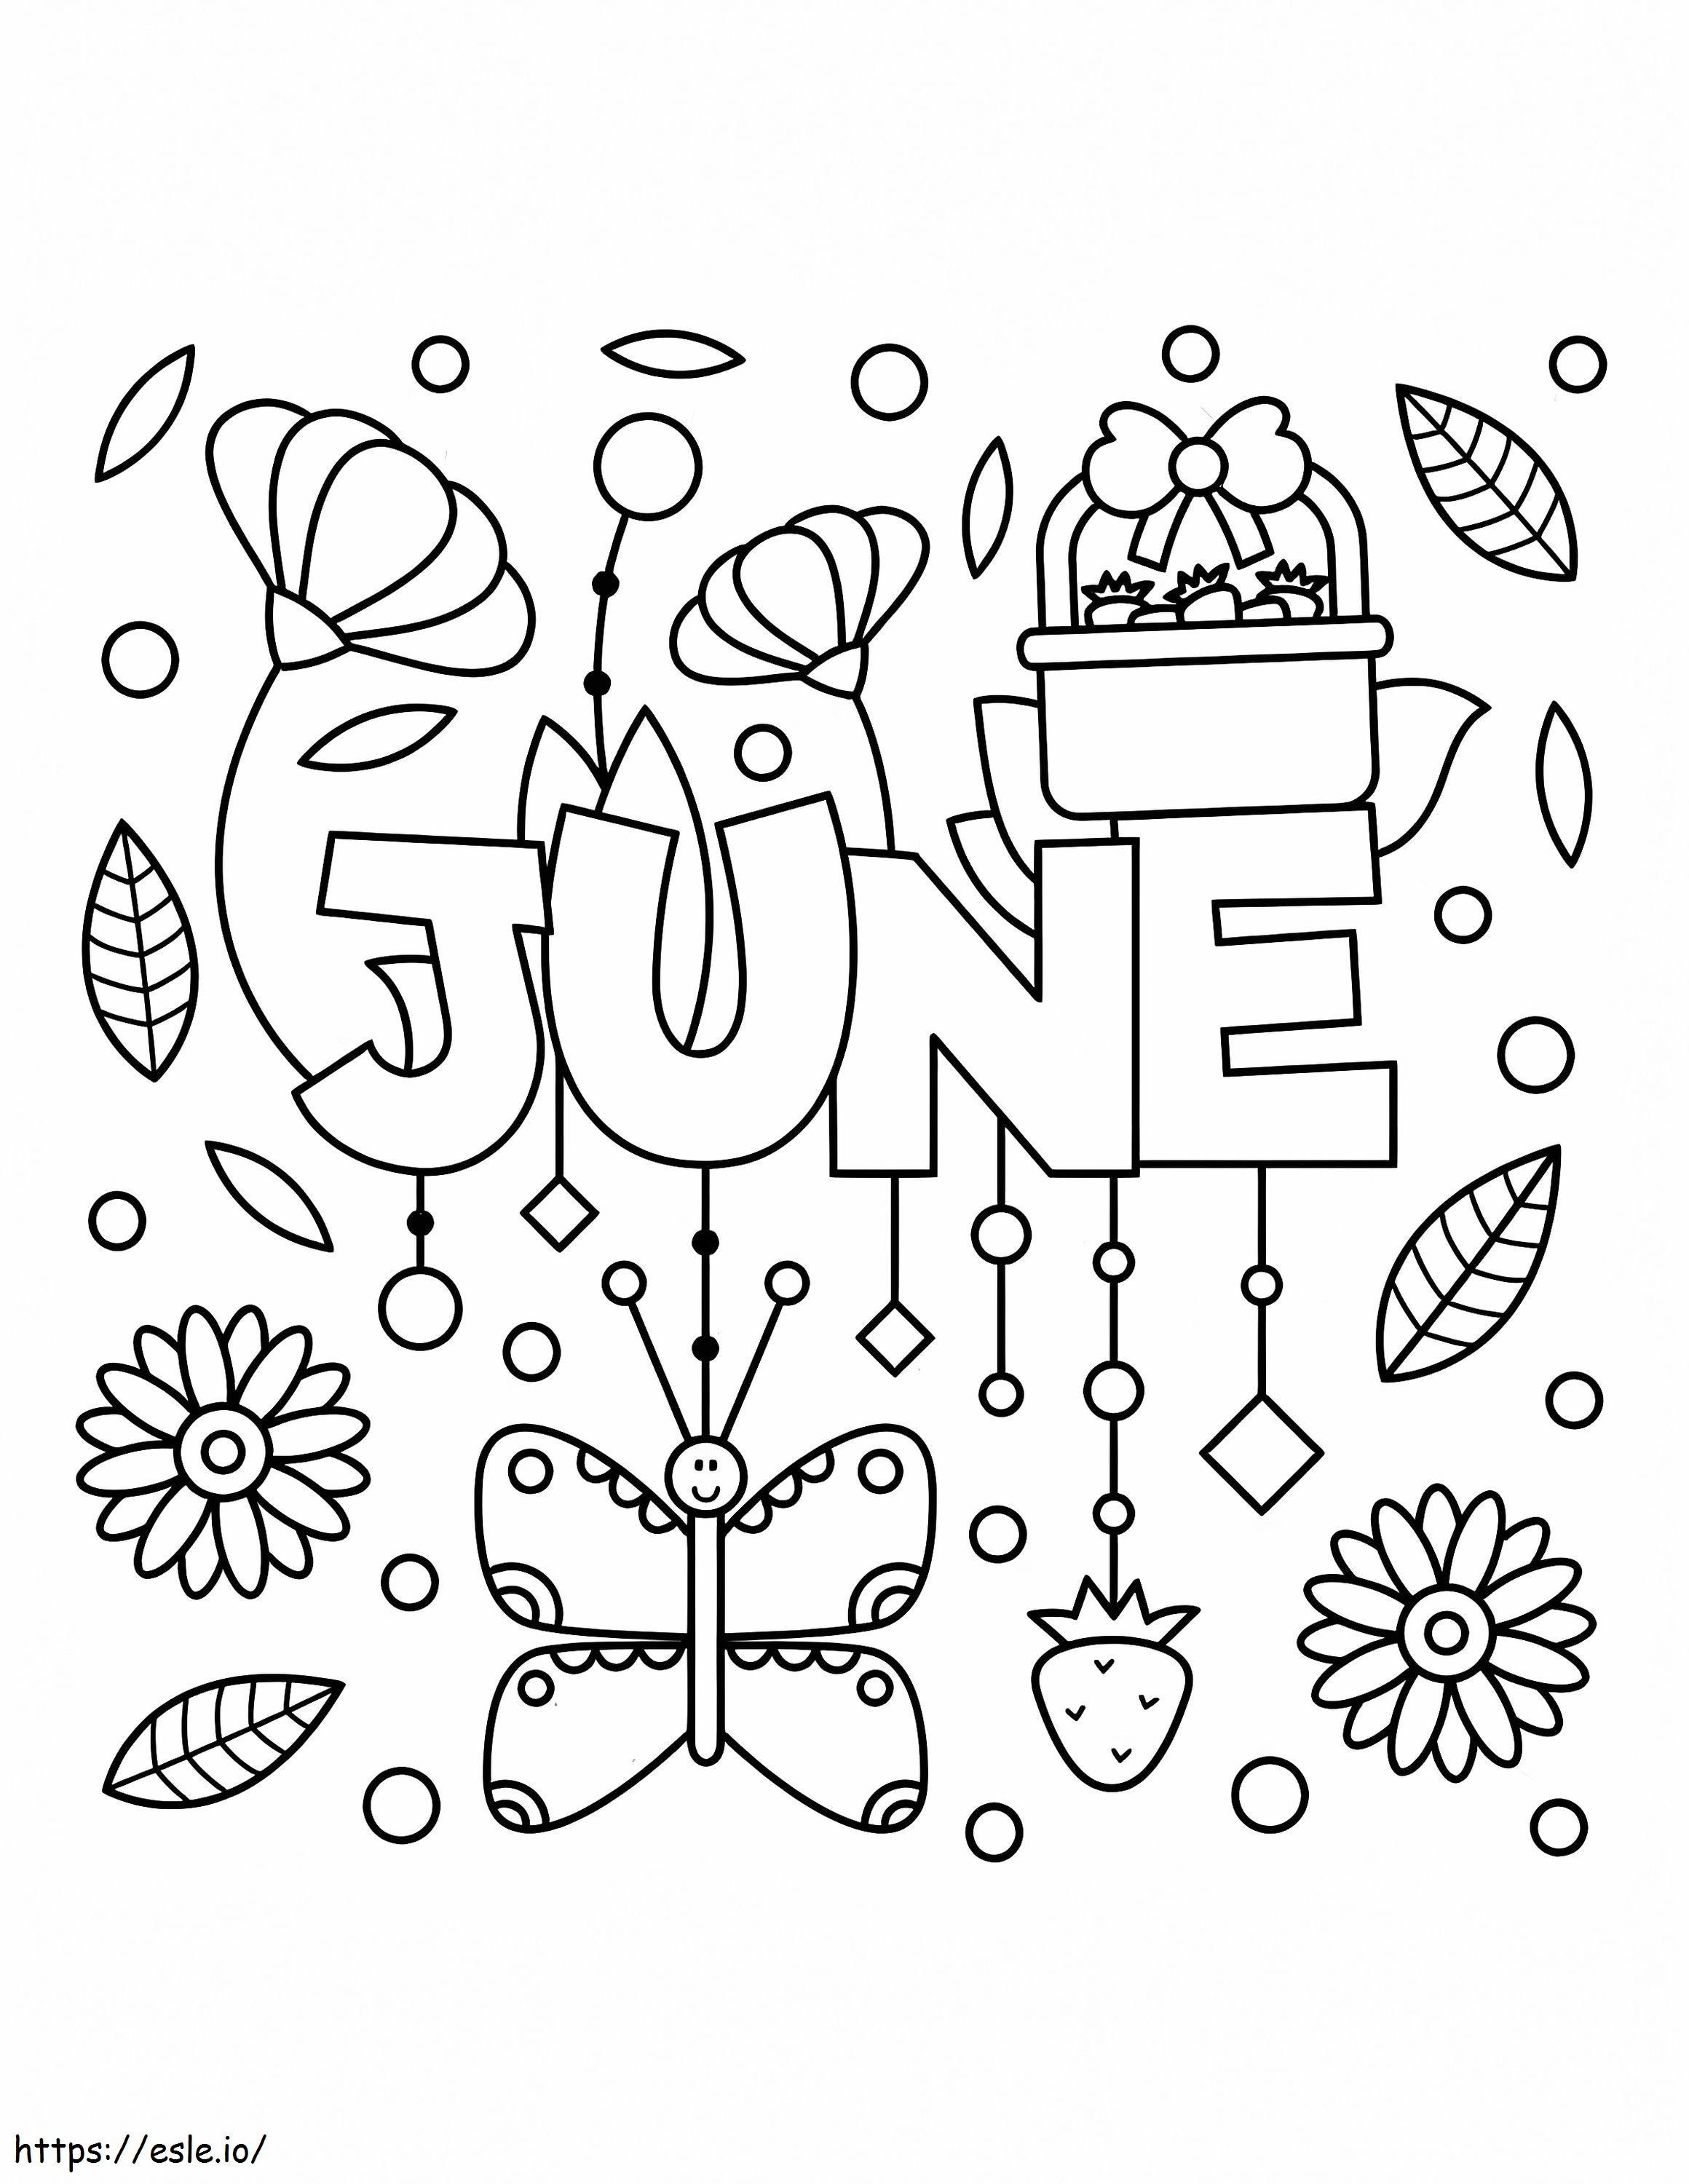 Lovely July coloring page